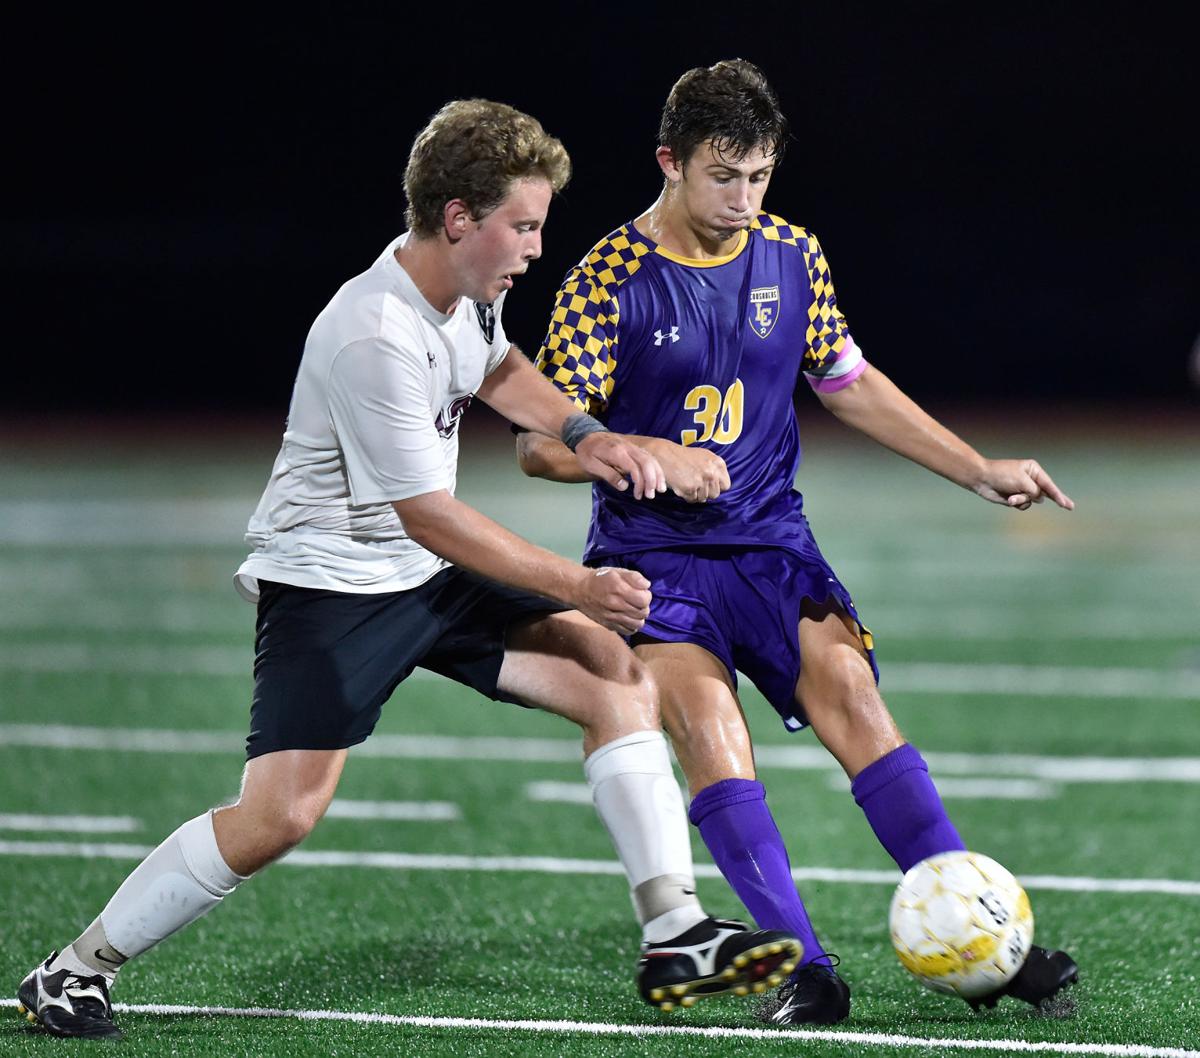 Boys Soccer Lancaster Catholic prevails over Lancaster Country Day in